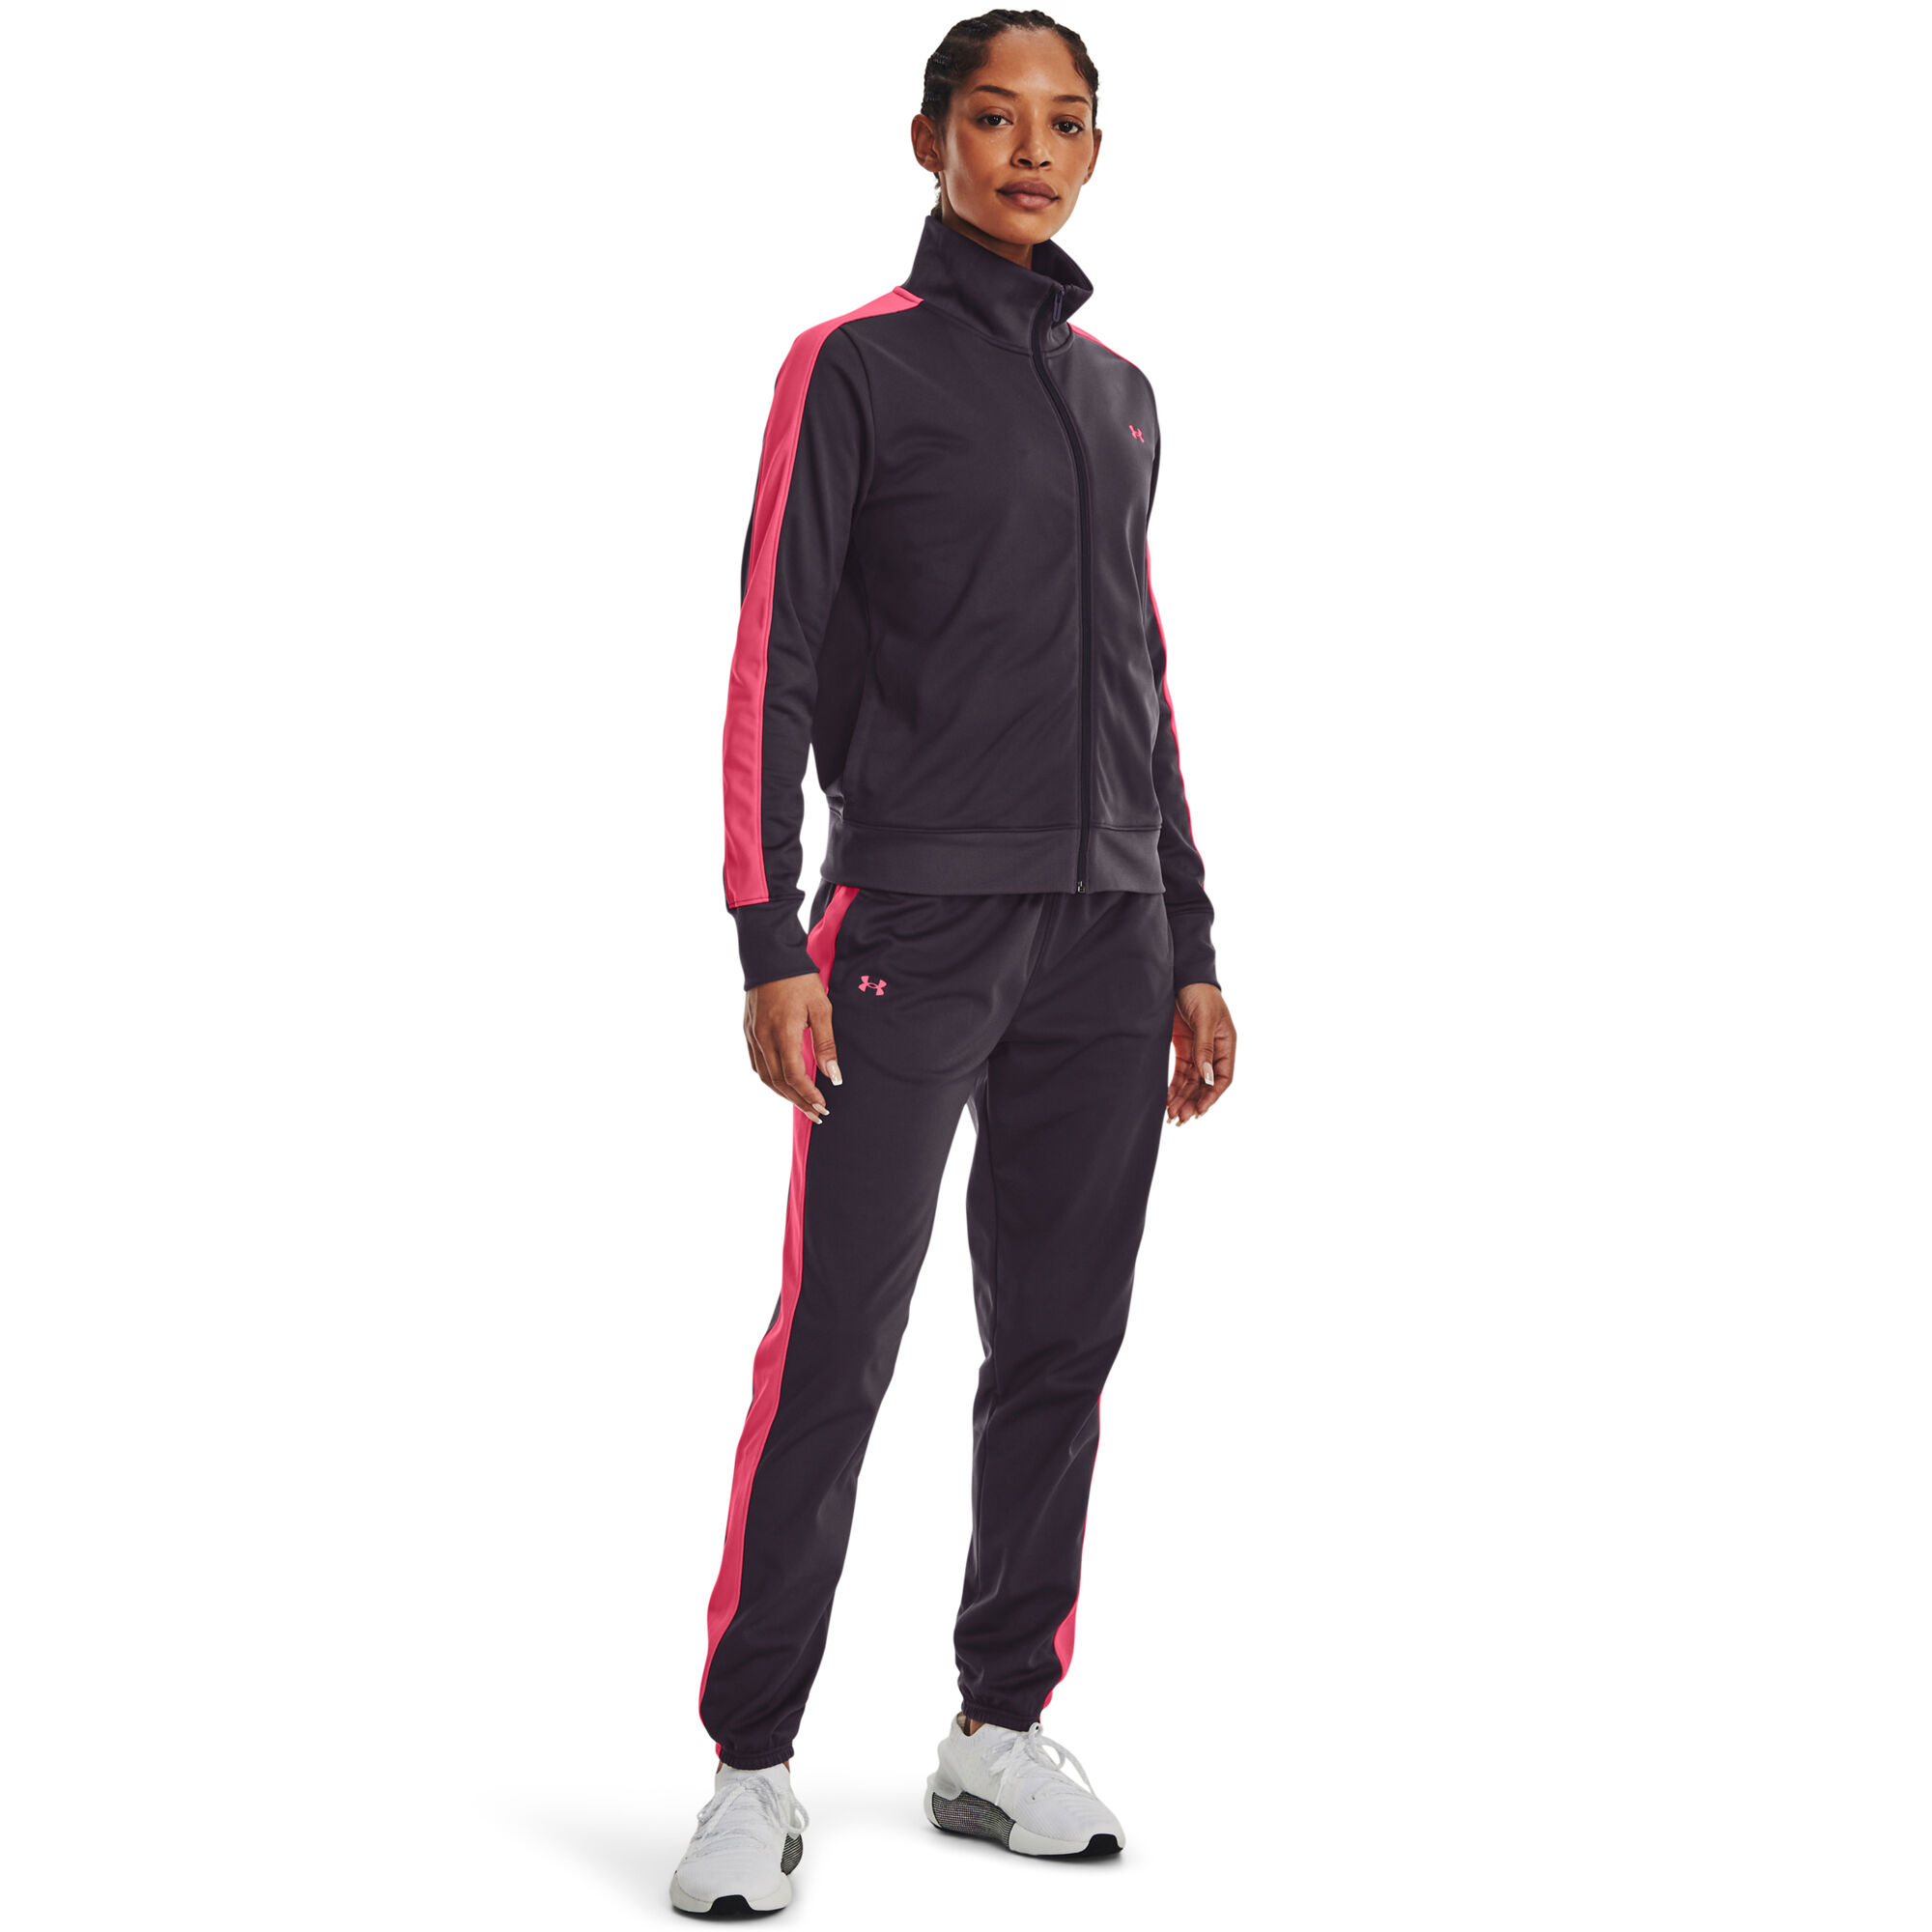 Buy Under Armour Tricot Tracksuit Women Violet, Red online